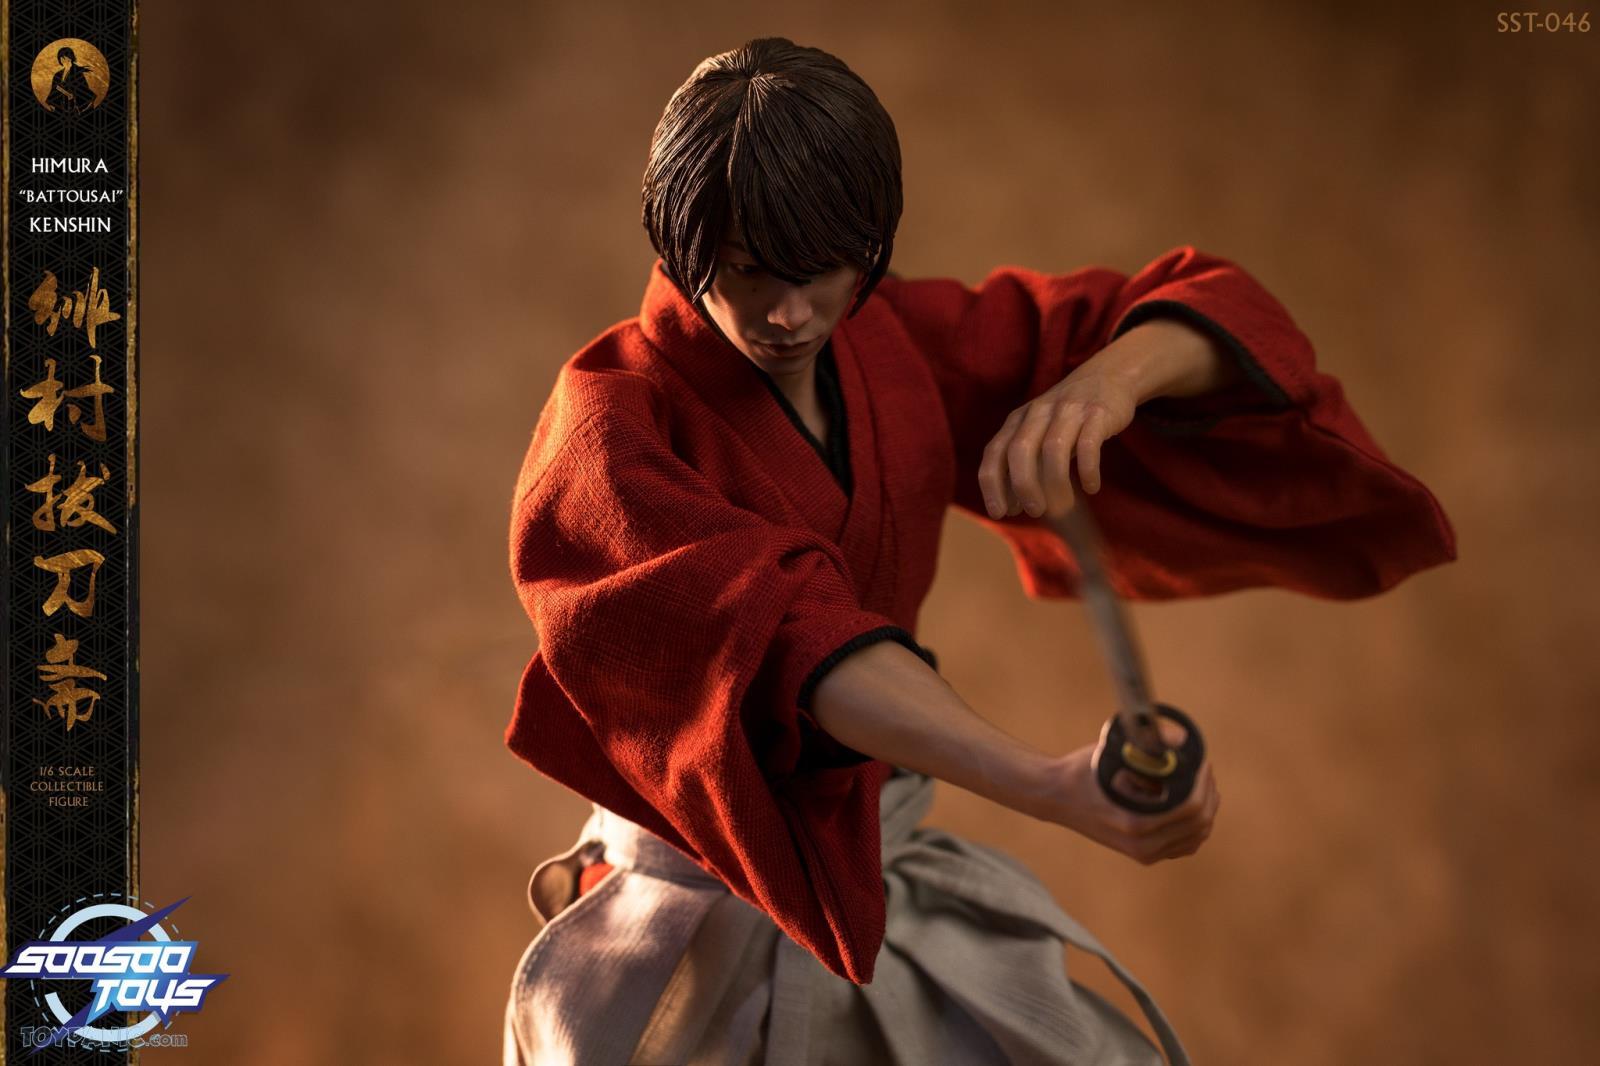 himura - NEW PRODUCT: 1/6 scale Rurouni Kenshin Collectible Figure from SooSooToys 712202251230PM_8826835